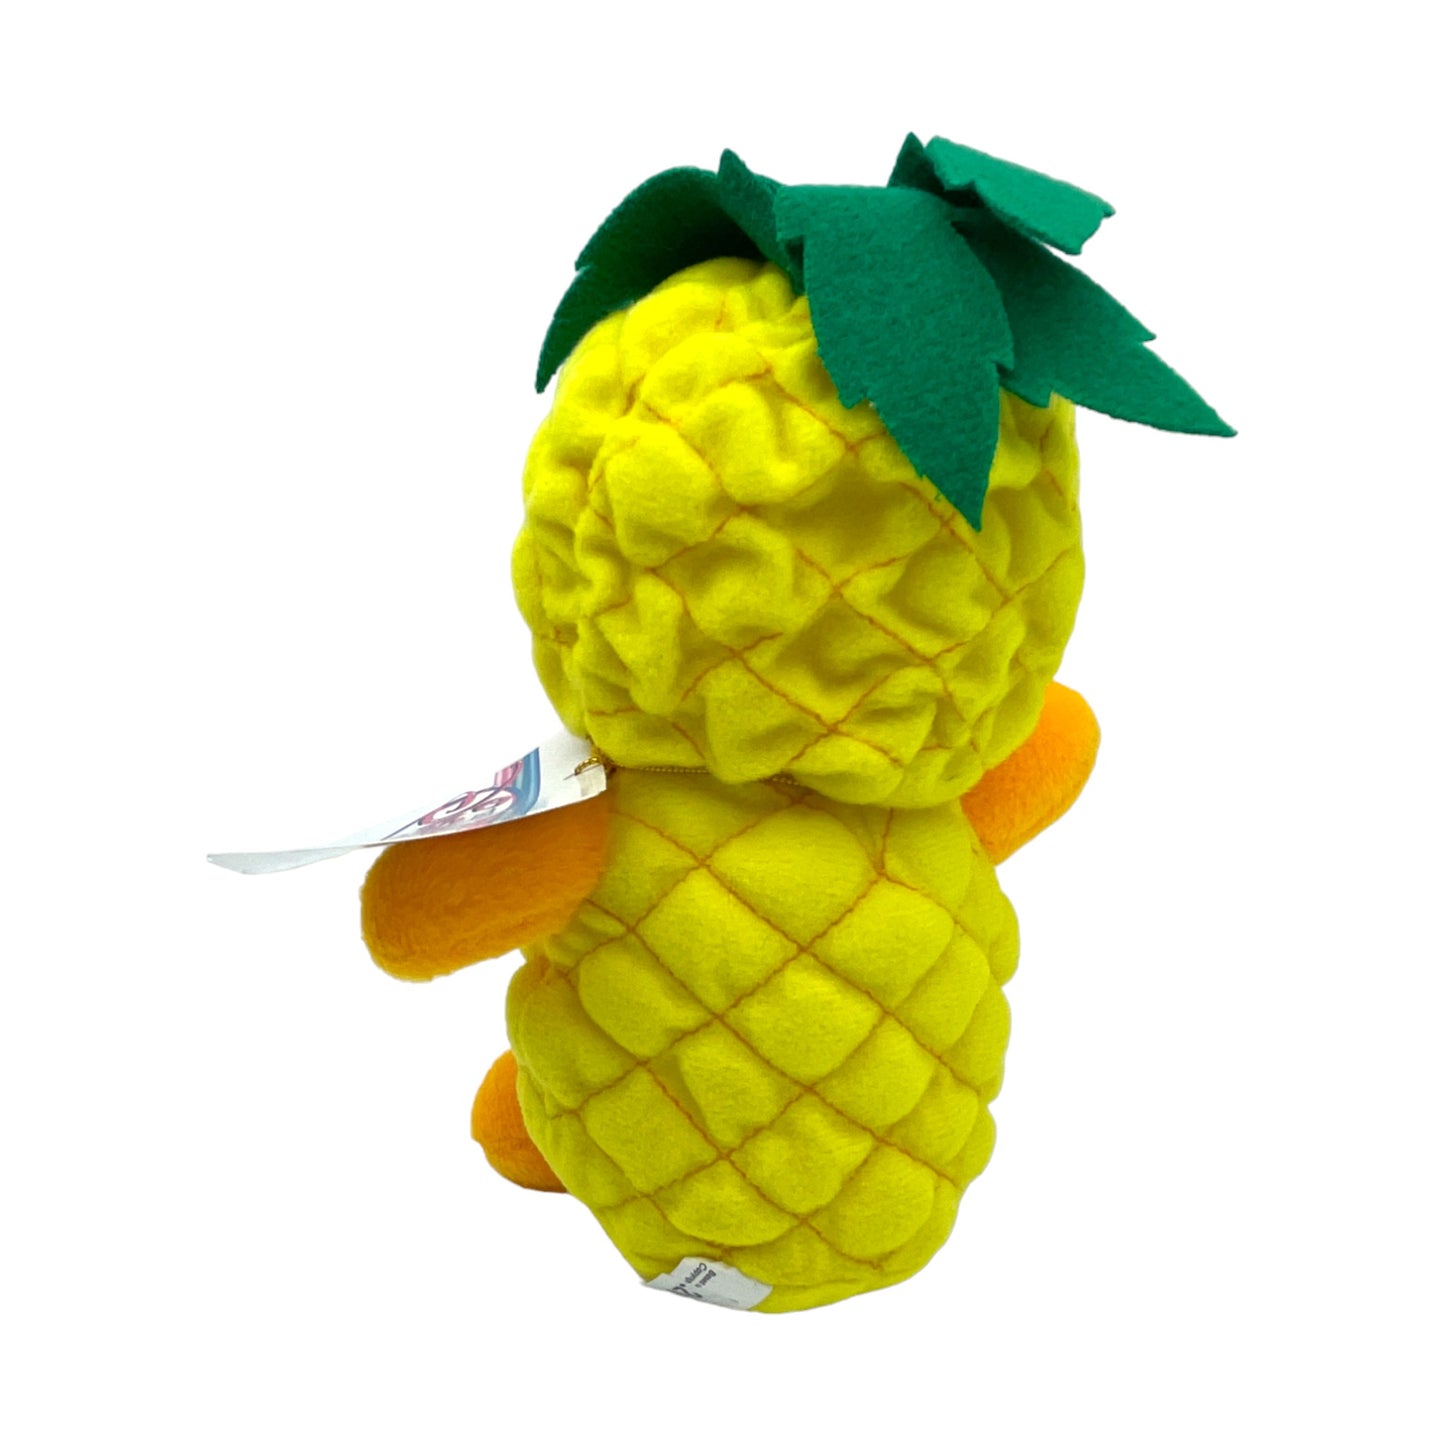 Disney Store Tokyo - Pooh As A Pineapple - Mini Bean Bag - With Tag - Vintage - 6"